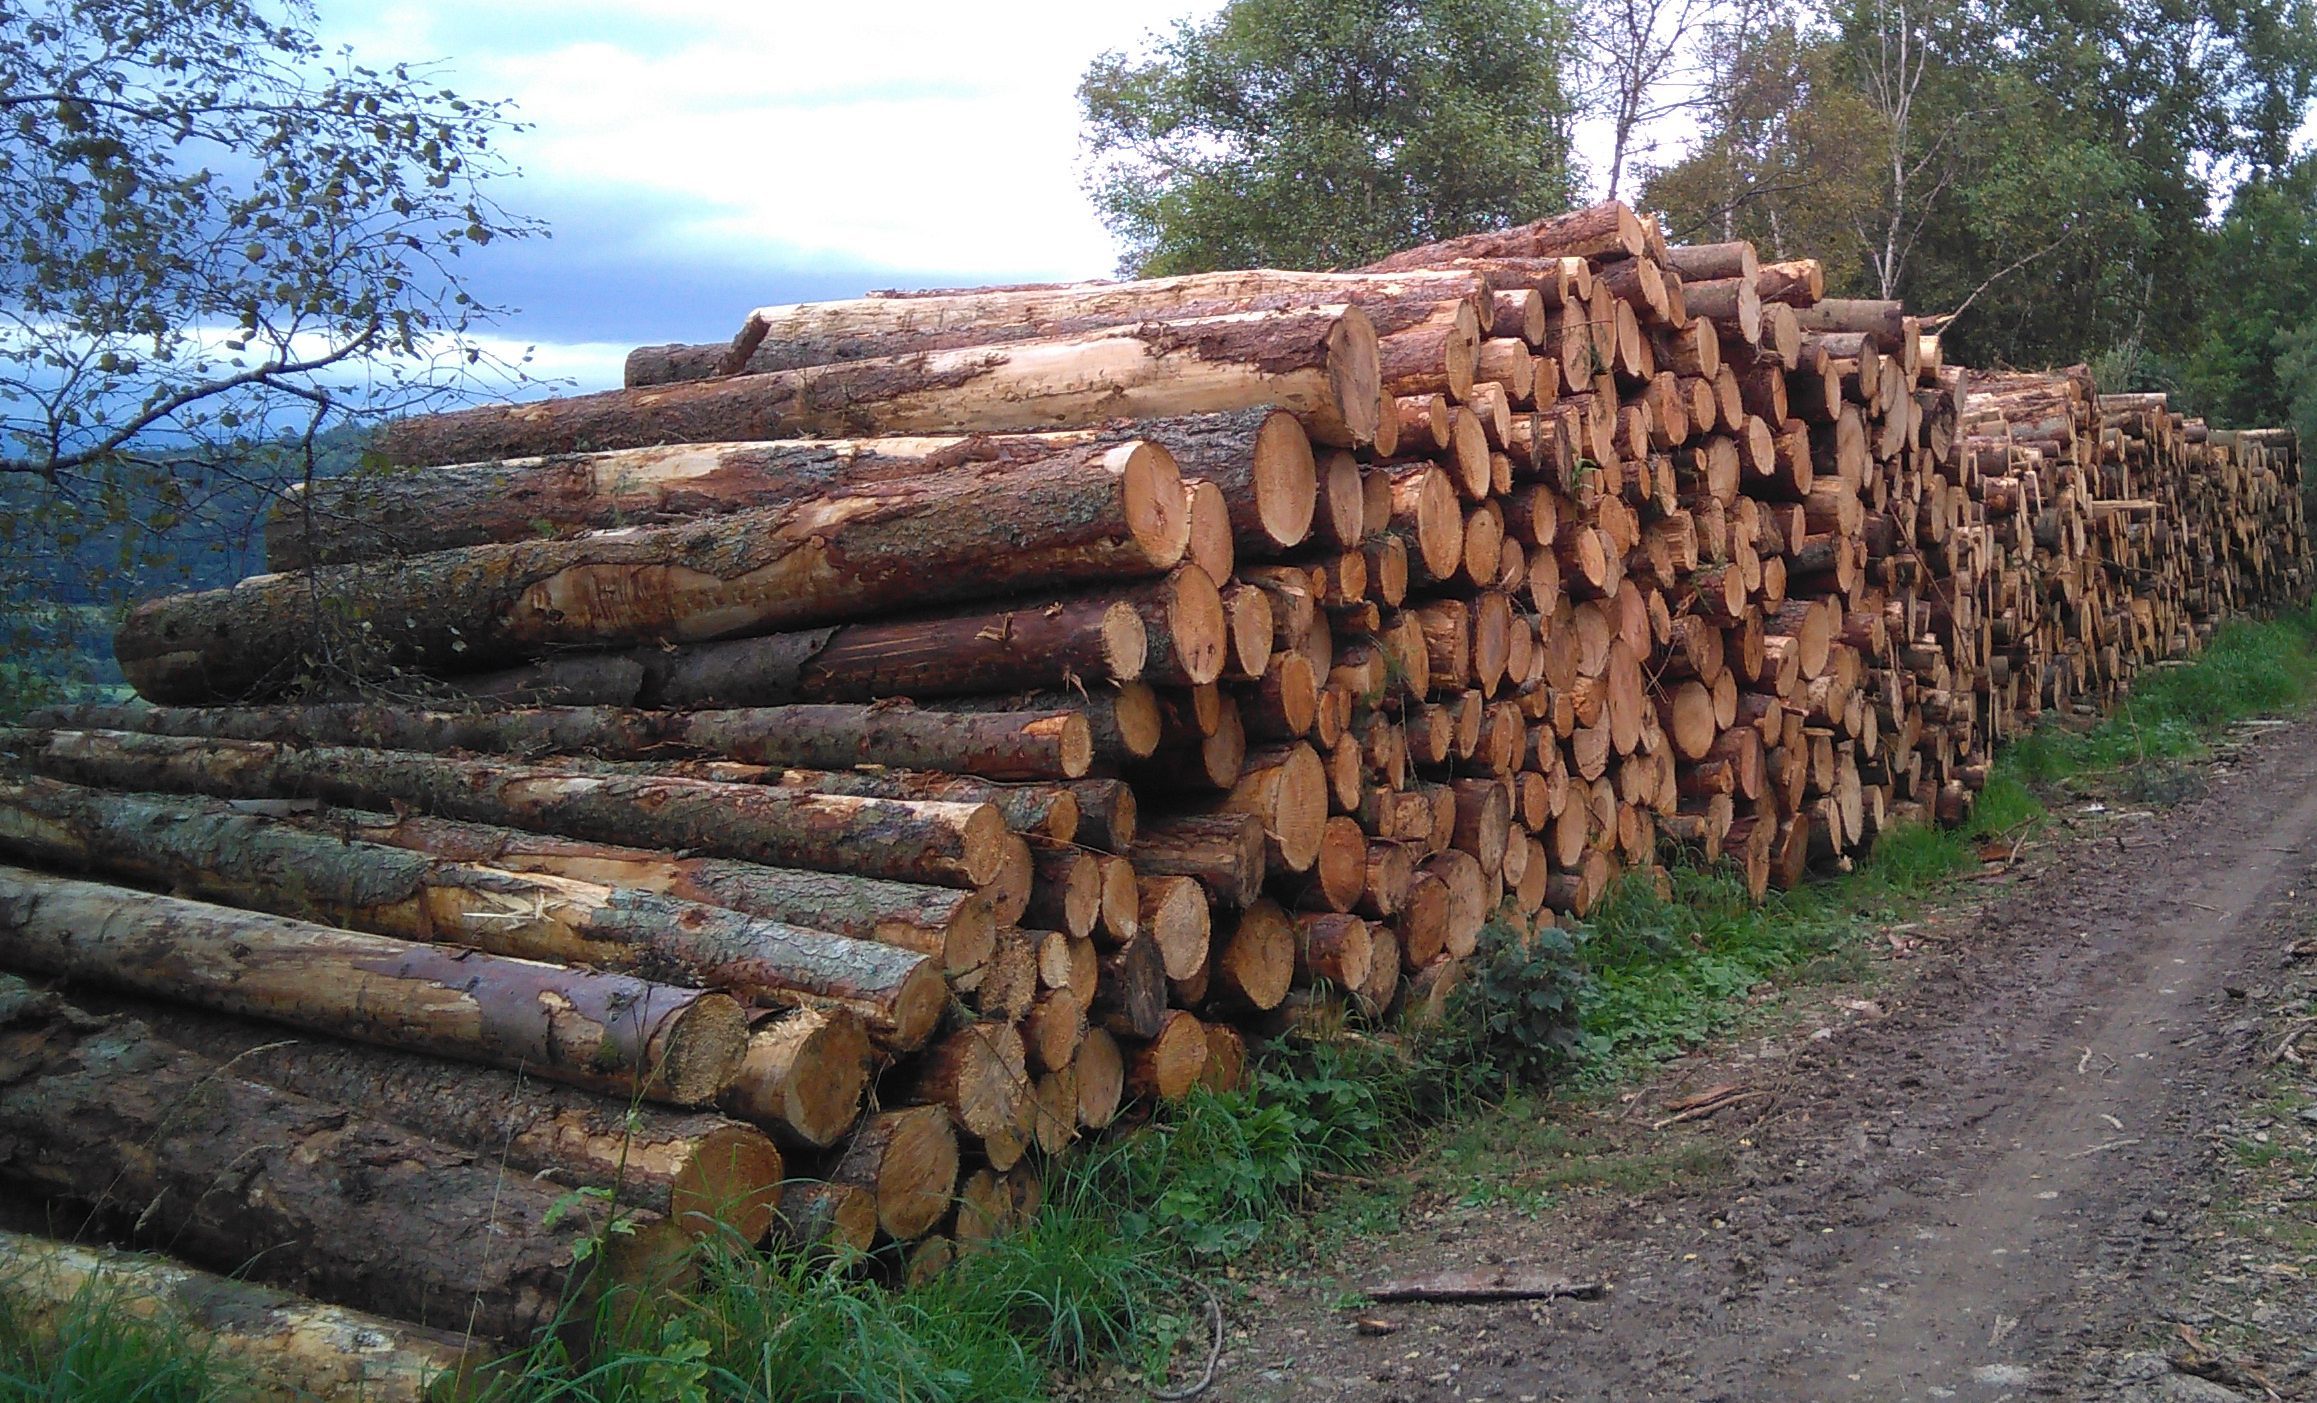 Demand is growing for forestry land